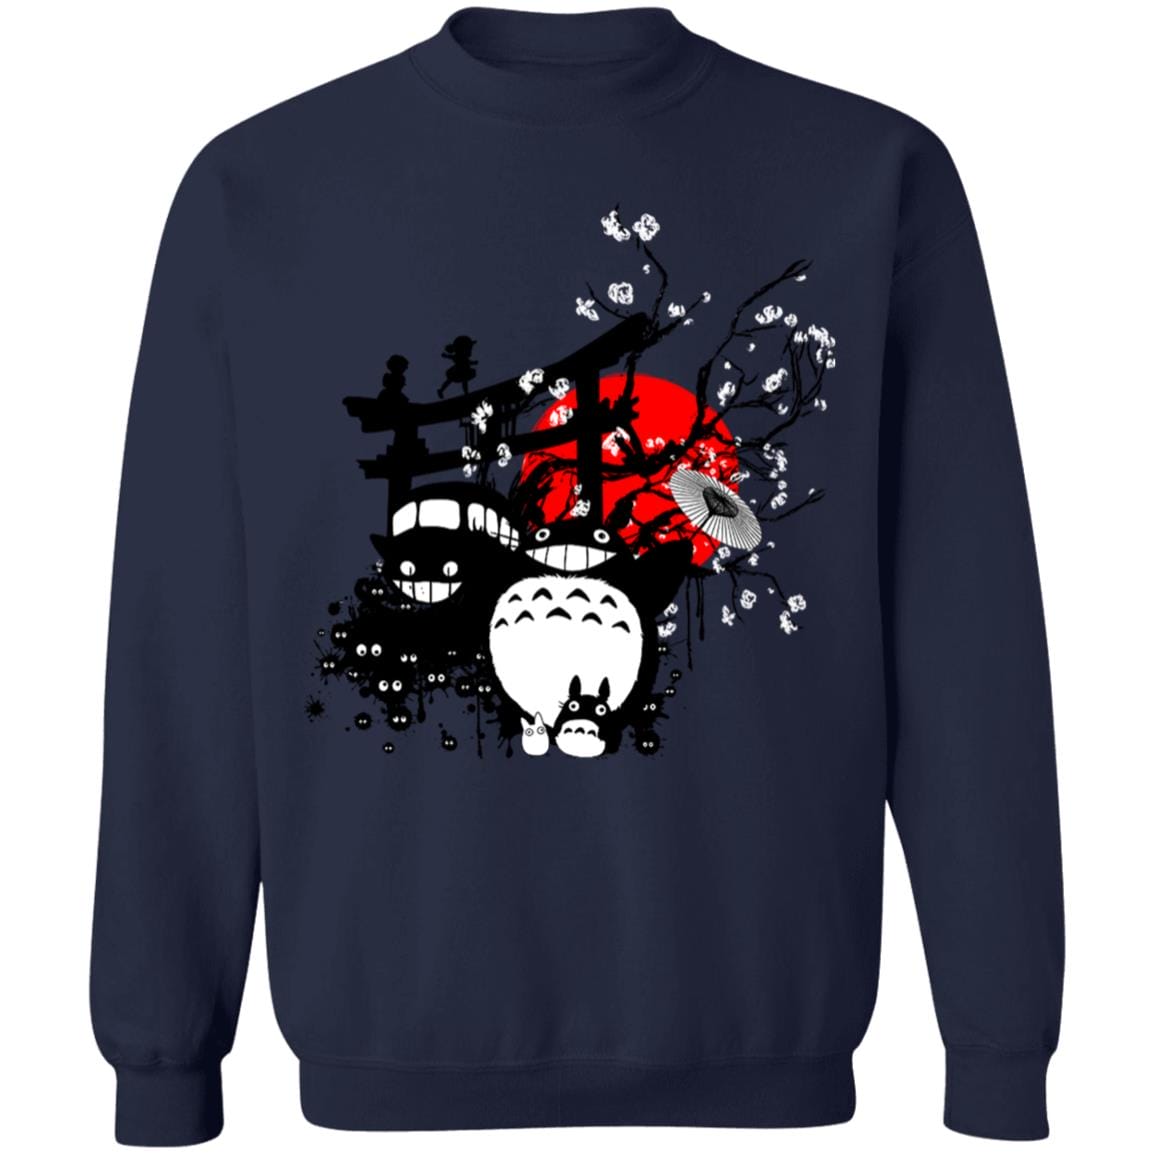 Totoro and Friends by the Red Moon Sweatshirt